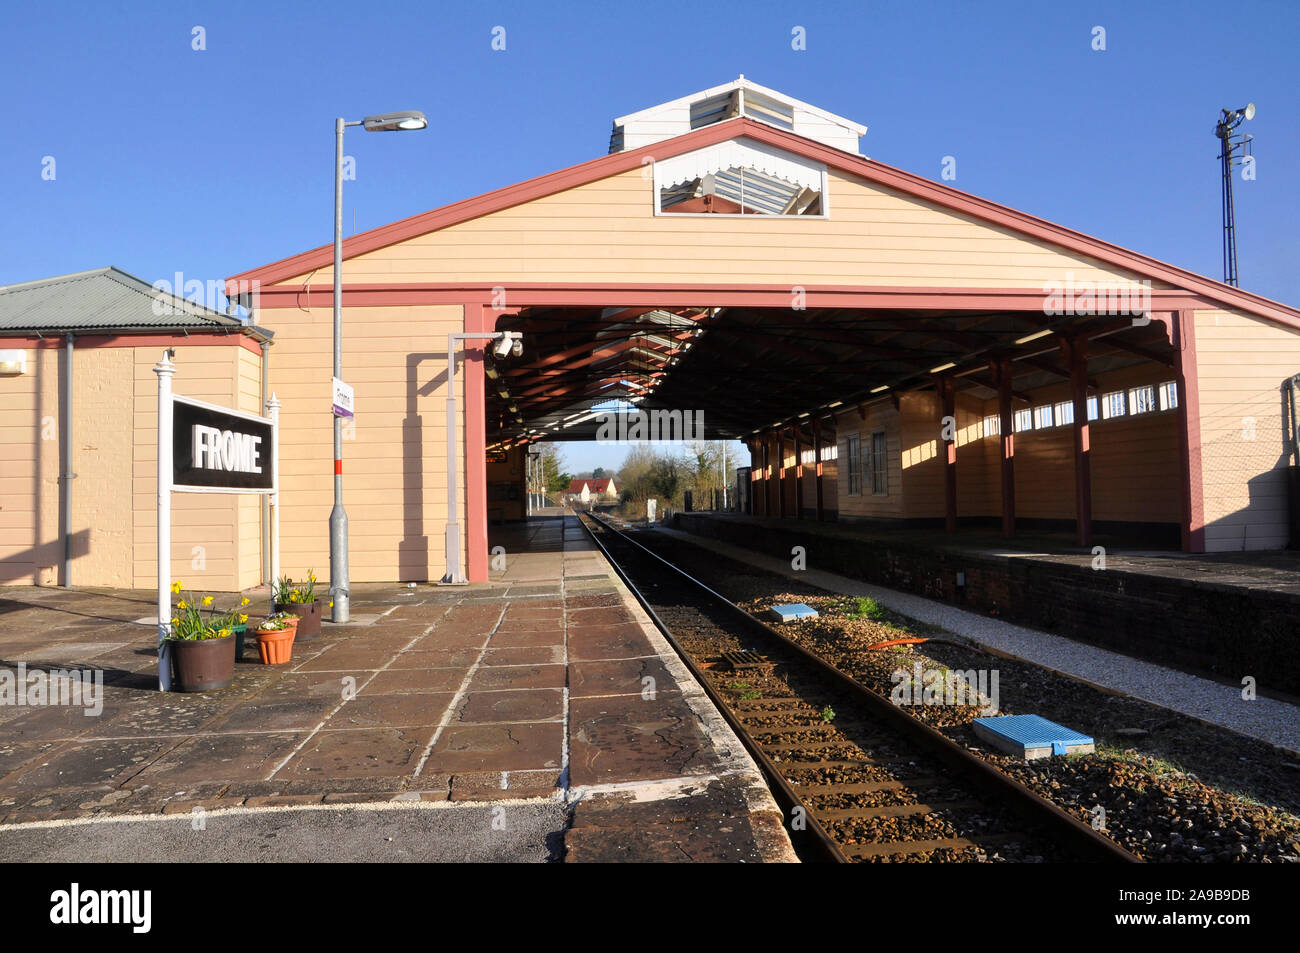 Frome railway station,one of the oldest through train shed railway stations still in use.Wooden construction opened in 1850 to a design by G Hannaford Stock Photo